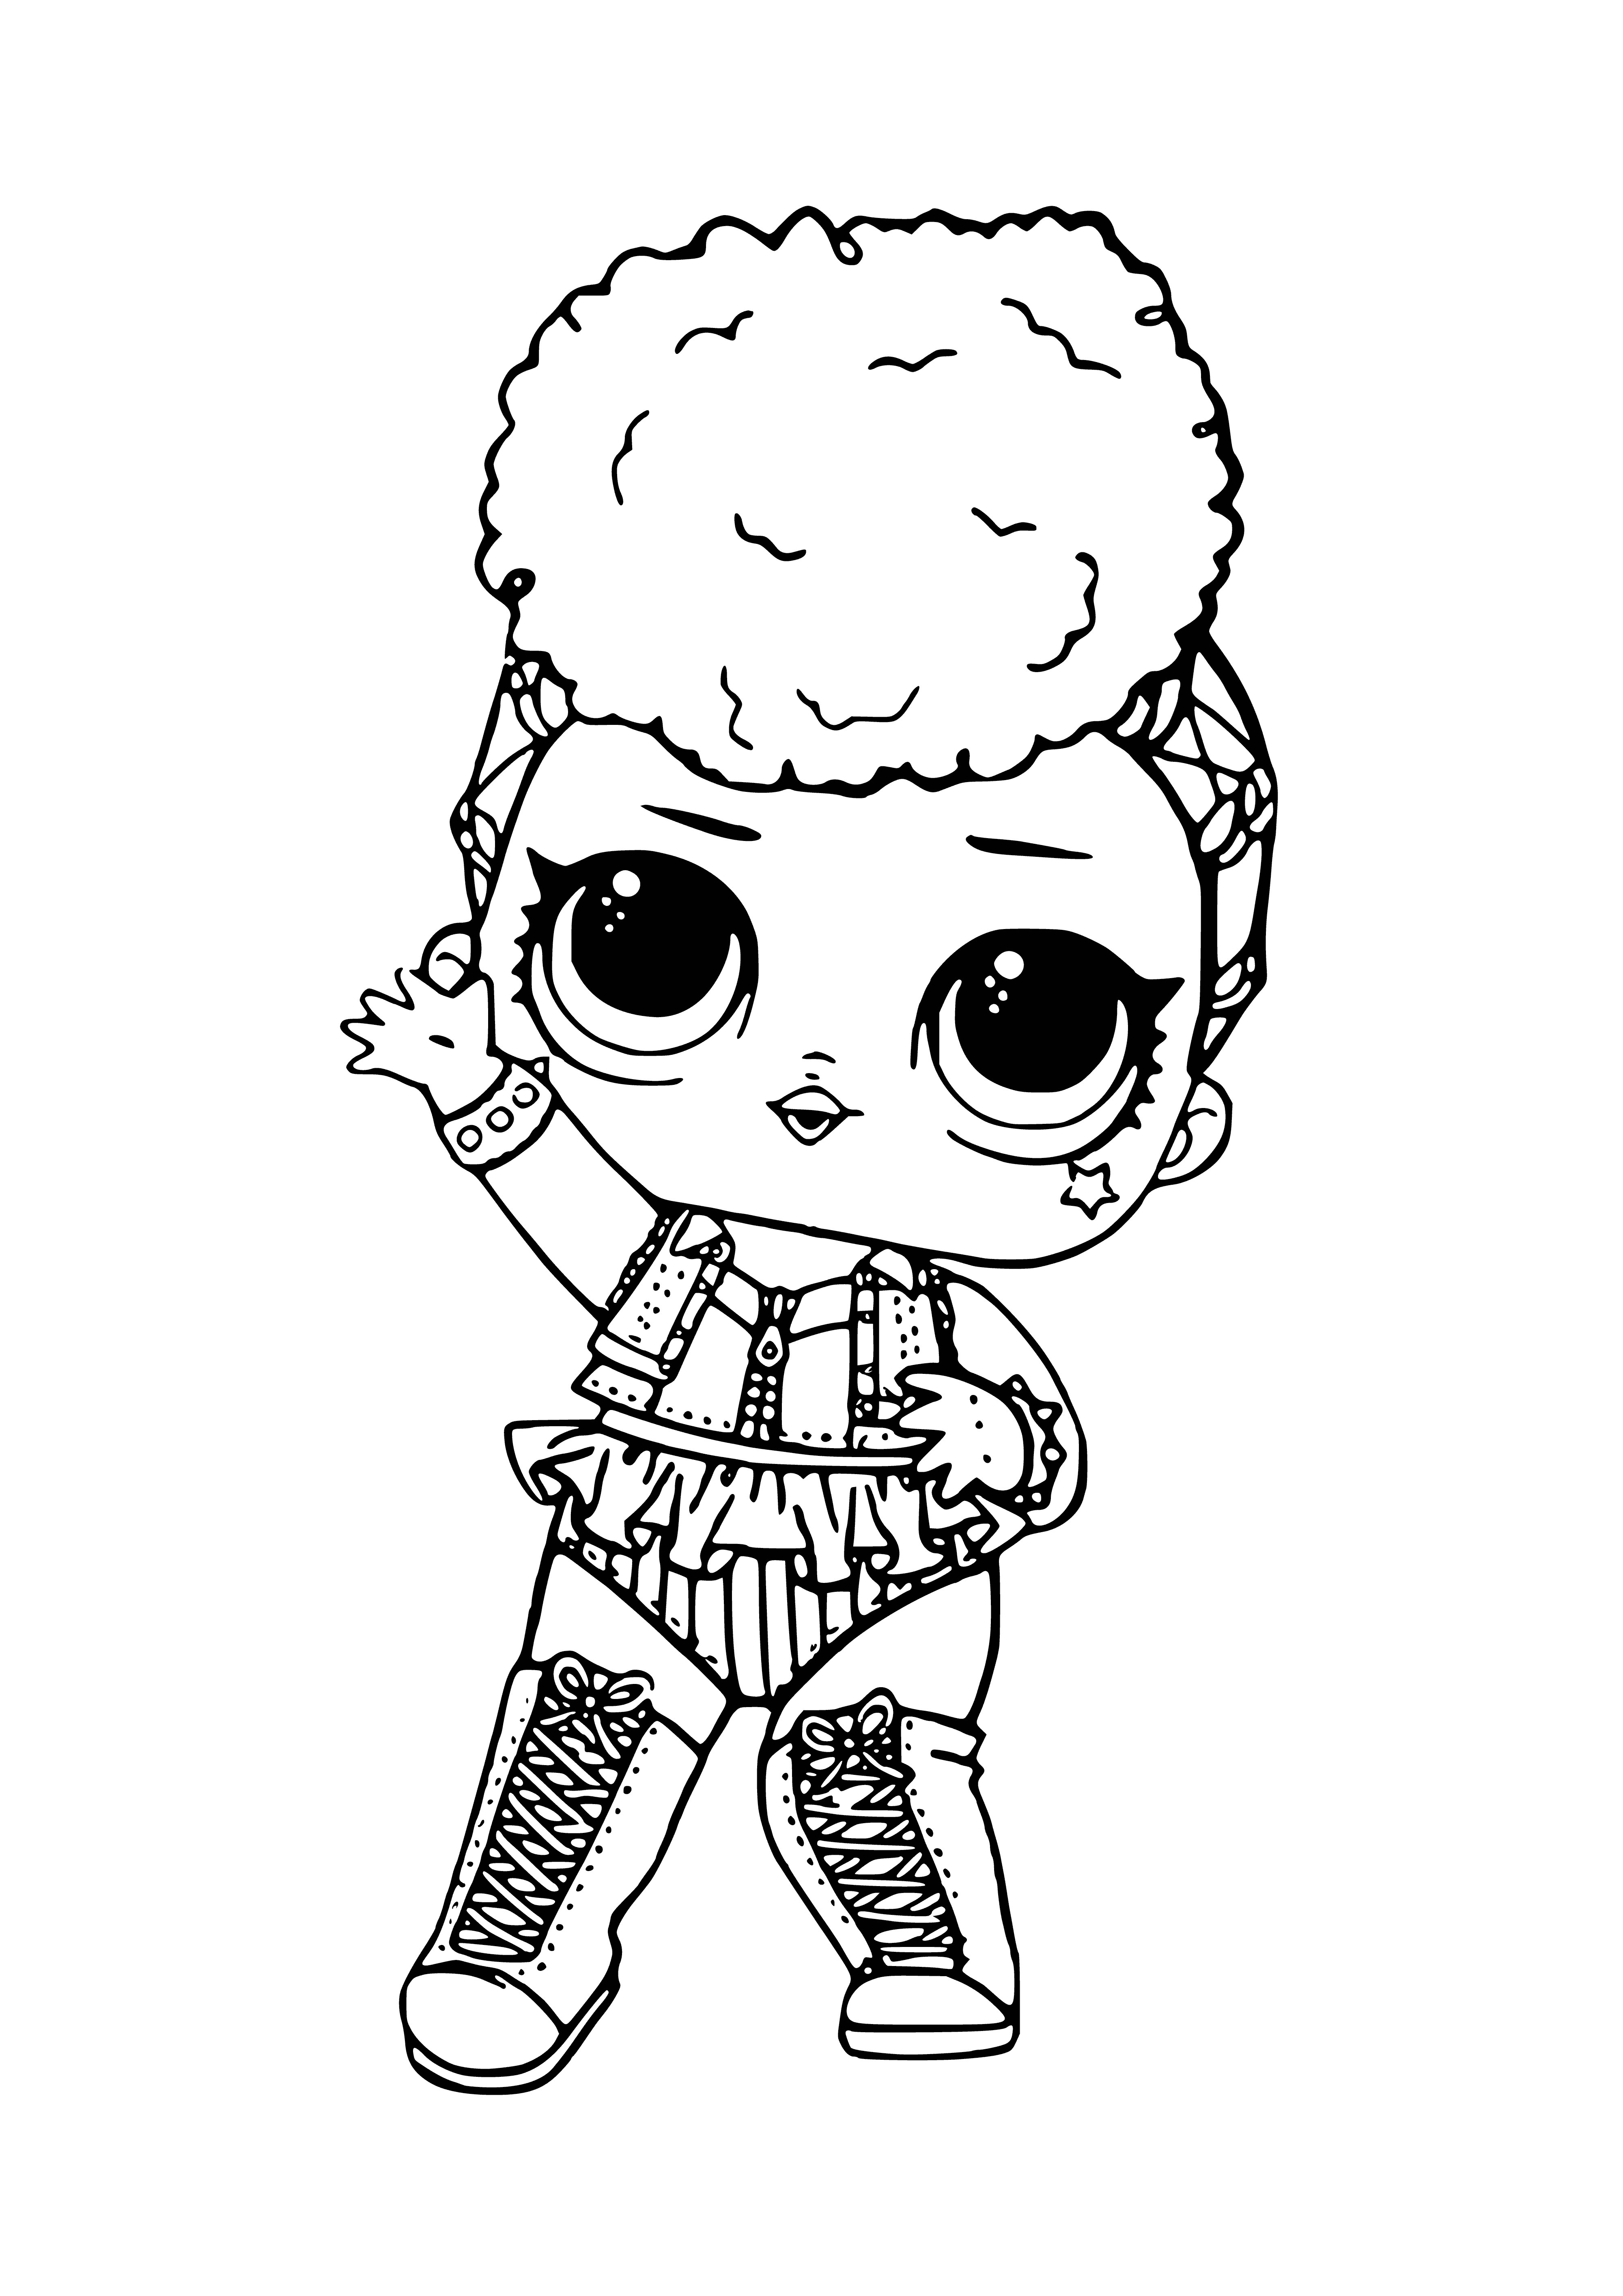 LOL Independent Queen confetti pop (Queen of Independence) coloring page